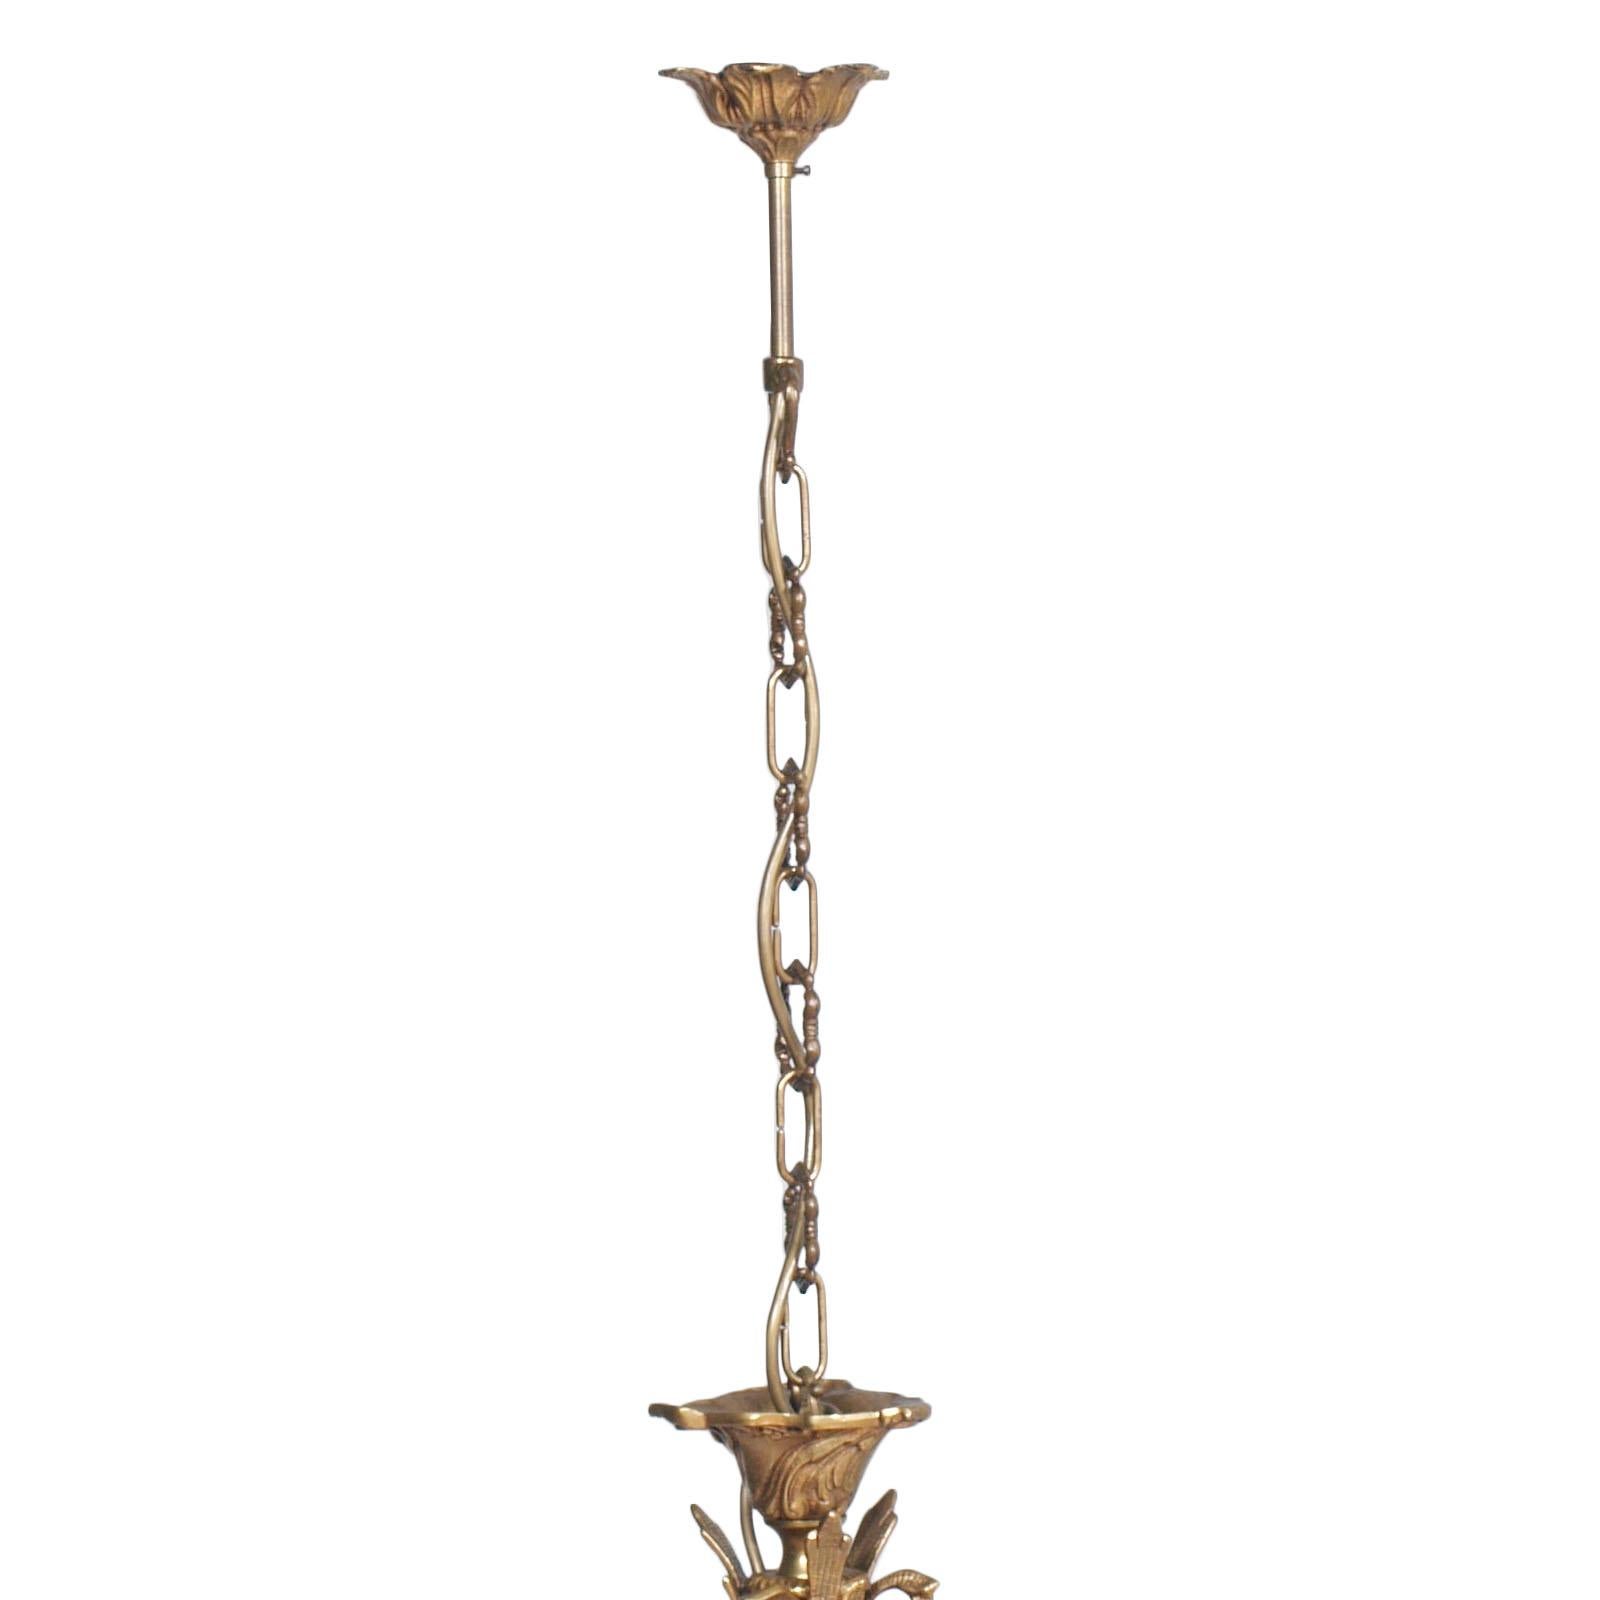 Antique 18th century very heavy electrified chandelier from a old candlestick, in gilded bronze with six lights.

Measures cm: H 100, diam 65.